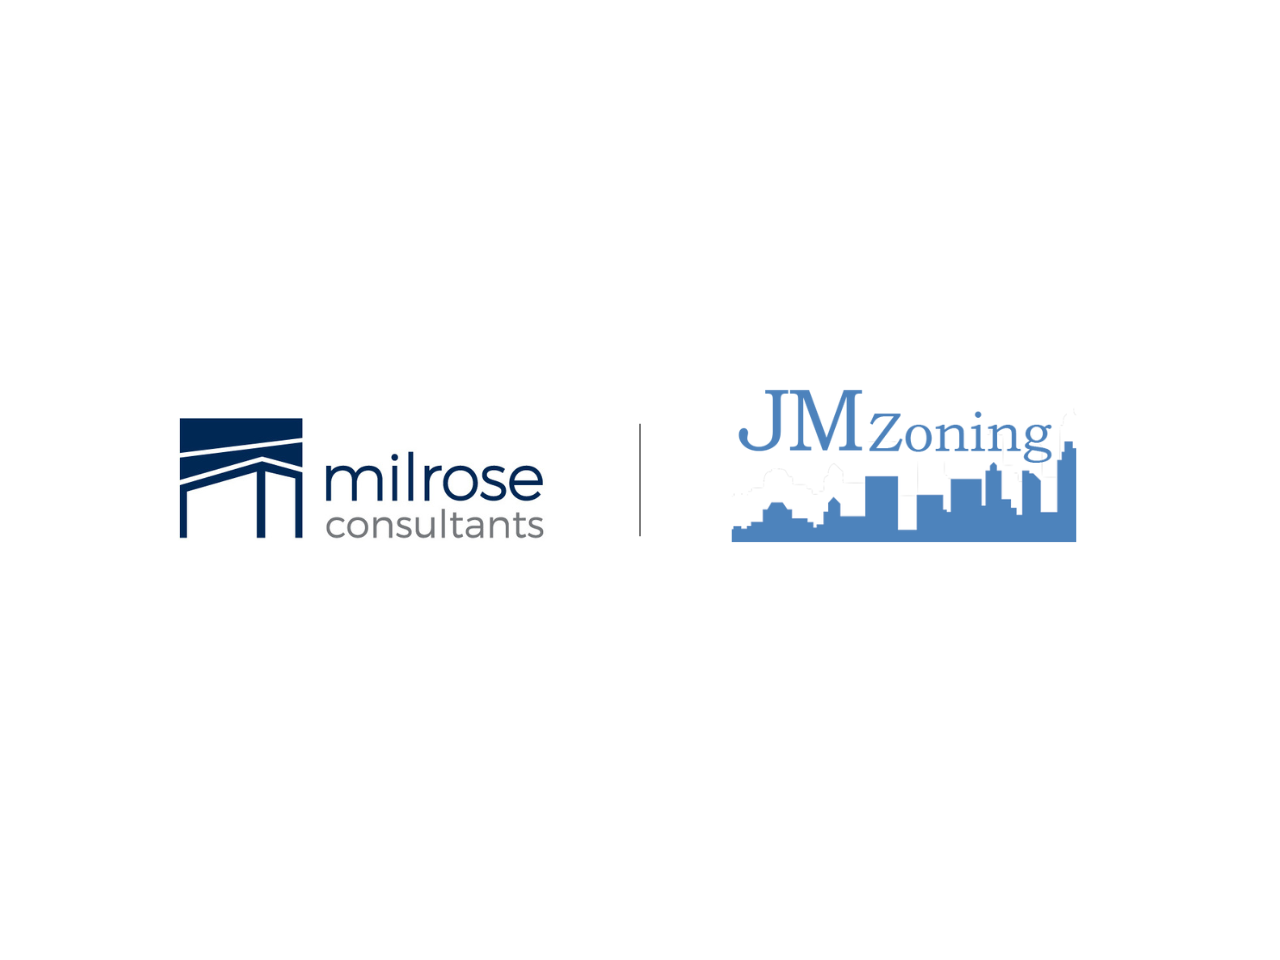 Milrose Consultants Launches New Strategic Partnership with JM Zoning